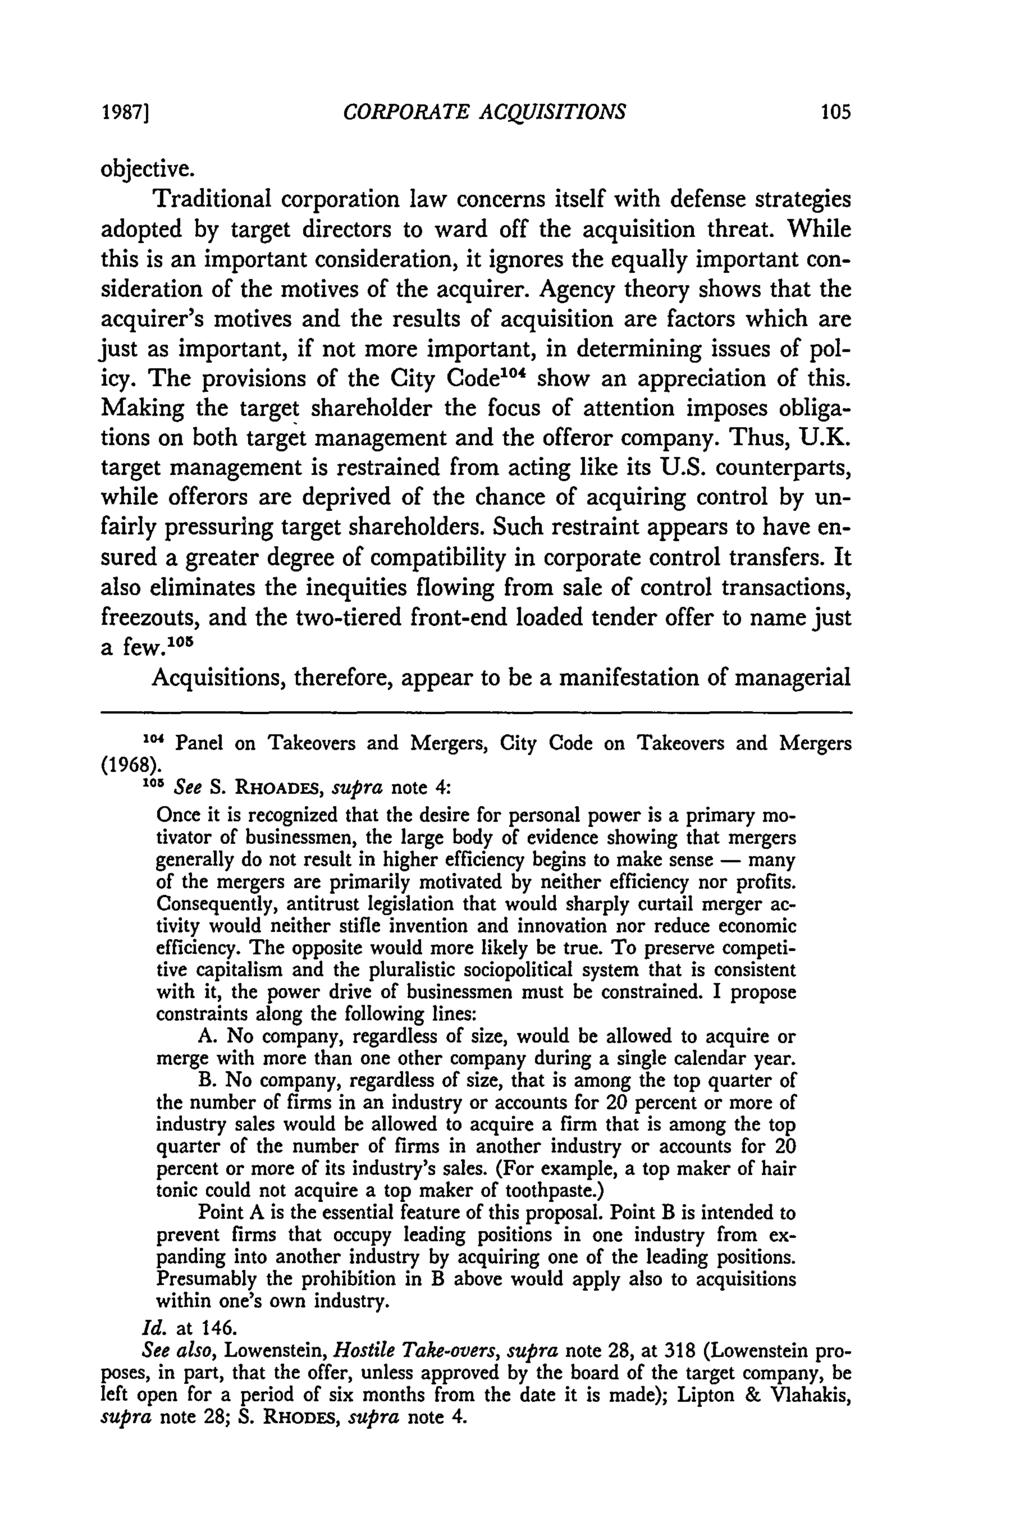 1987] CORPORATE ACQUISITIONS objective. Traditional corporation law concerns itself with defense strategies adopted by target directors to ward off the acquisition threat.